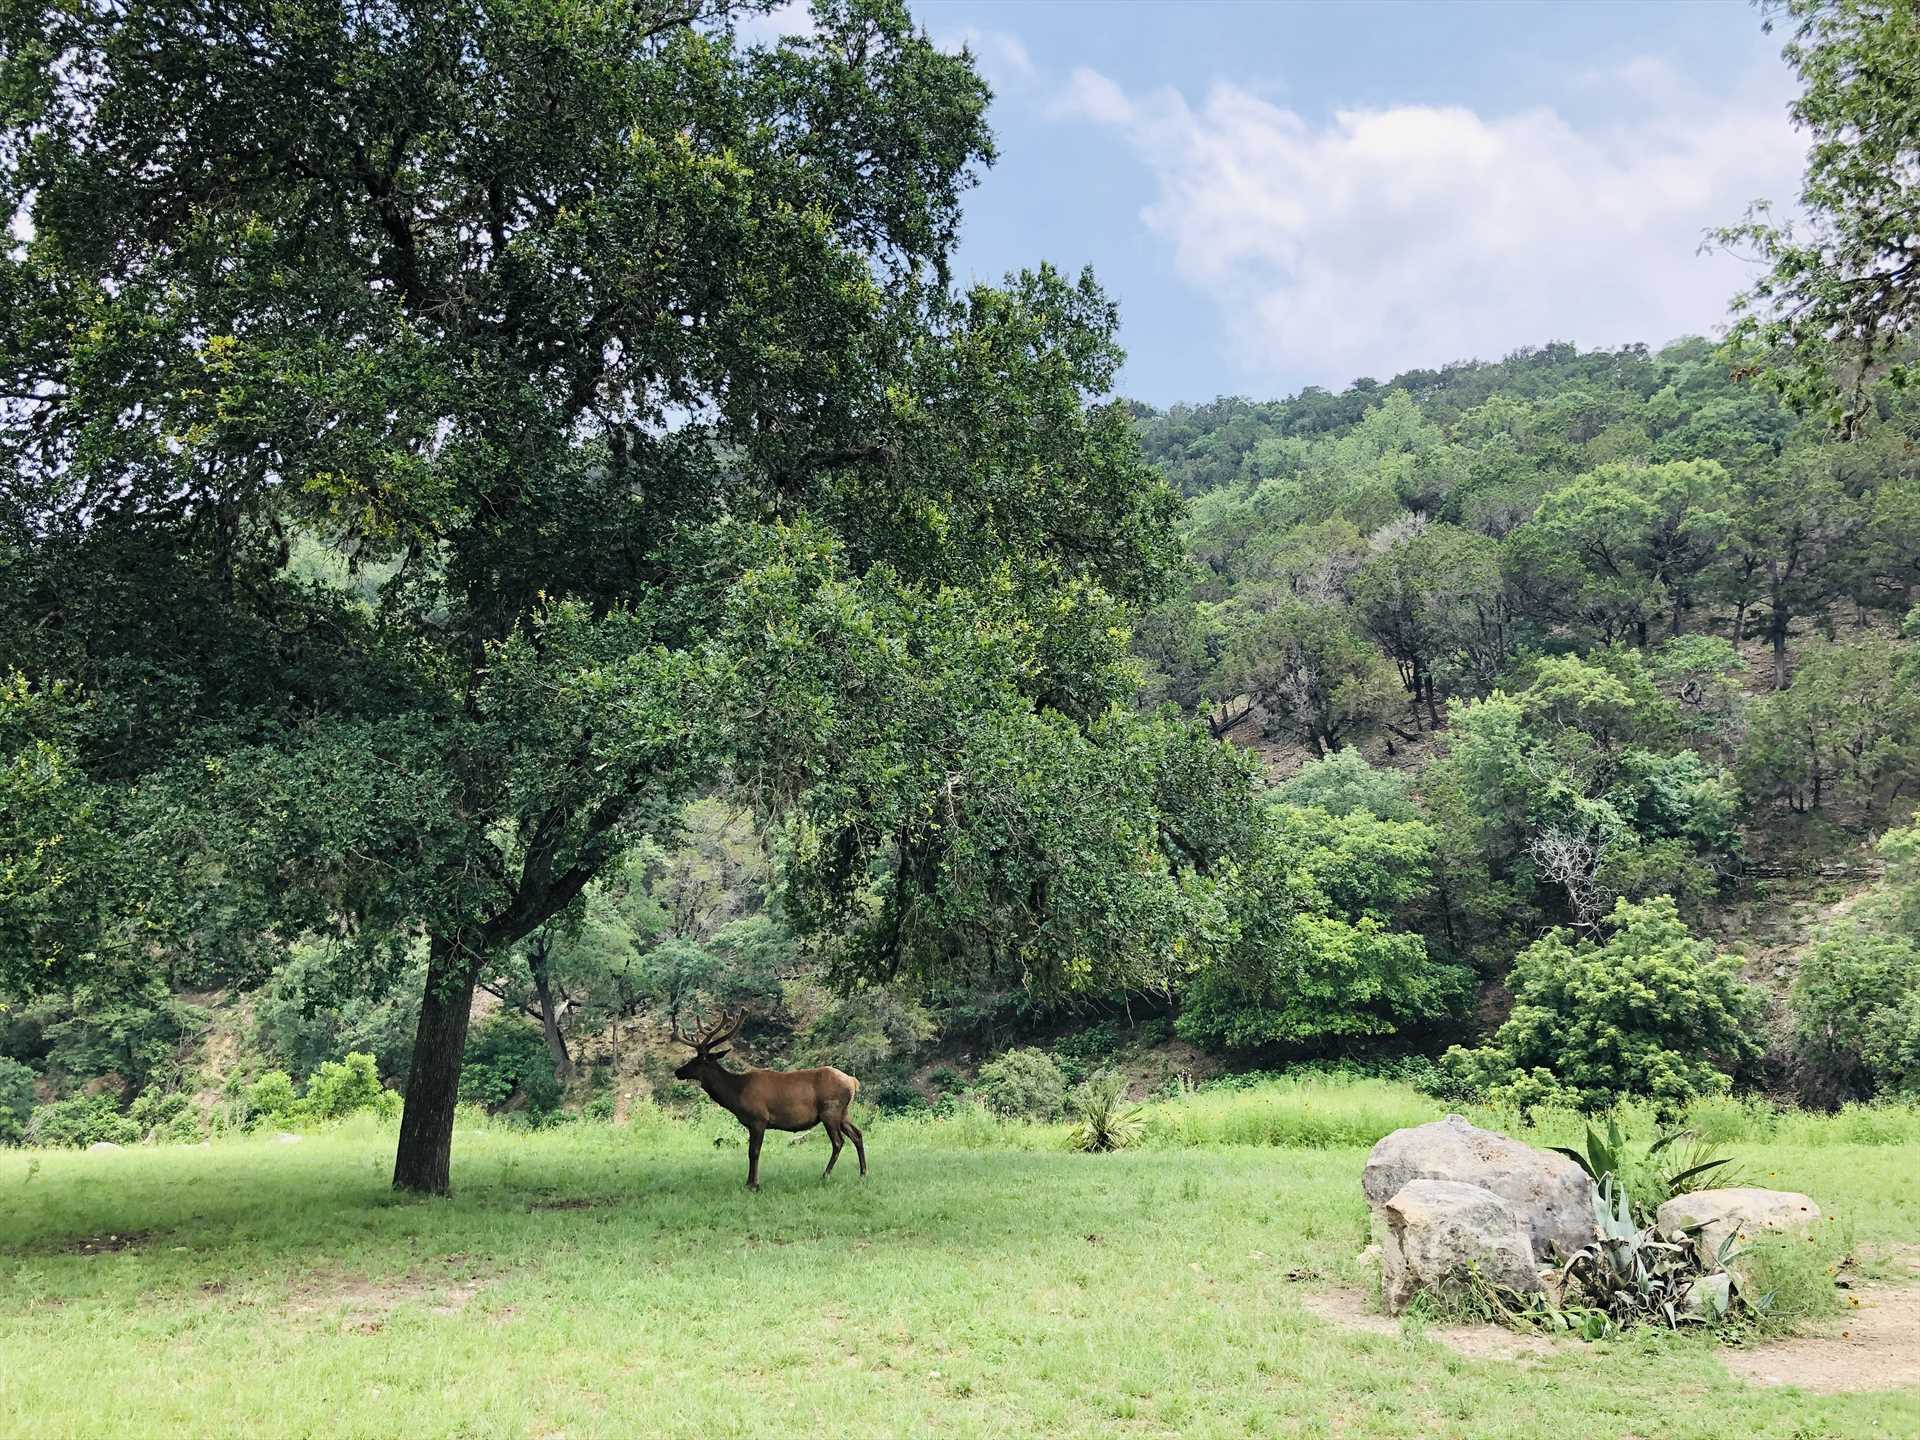                                                 There's no better place to find sweet solitude than the Texas Hill Country.